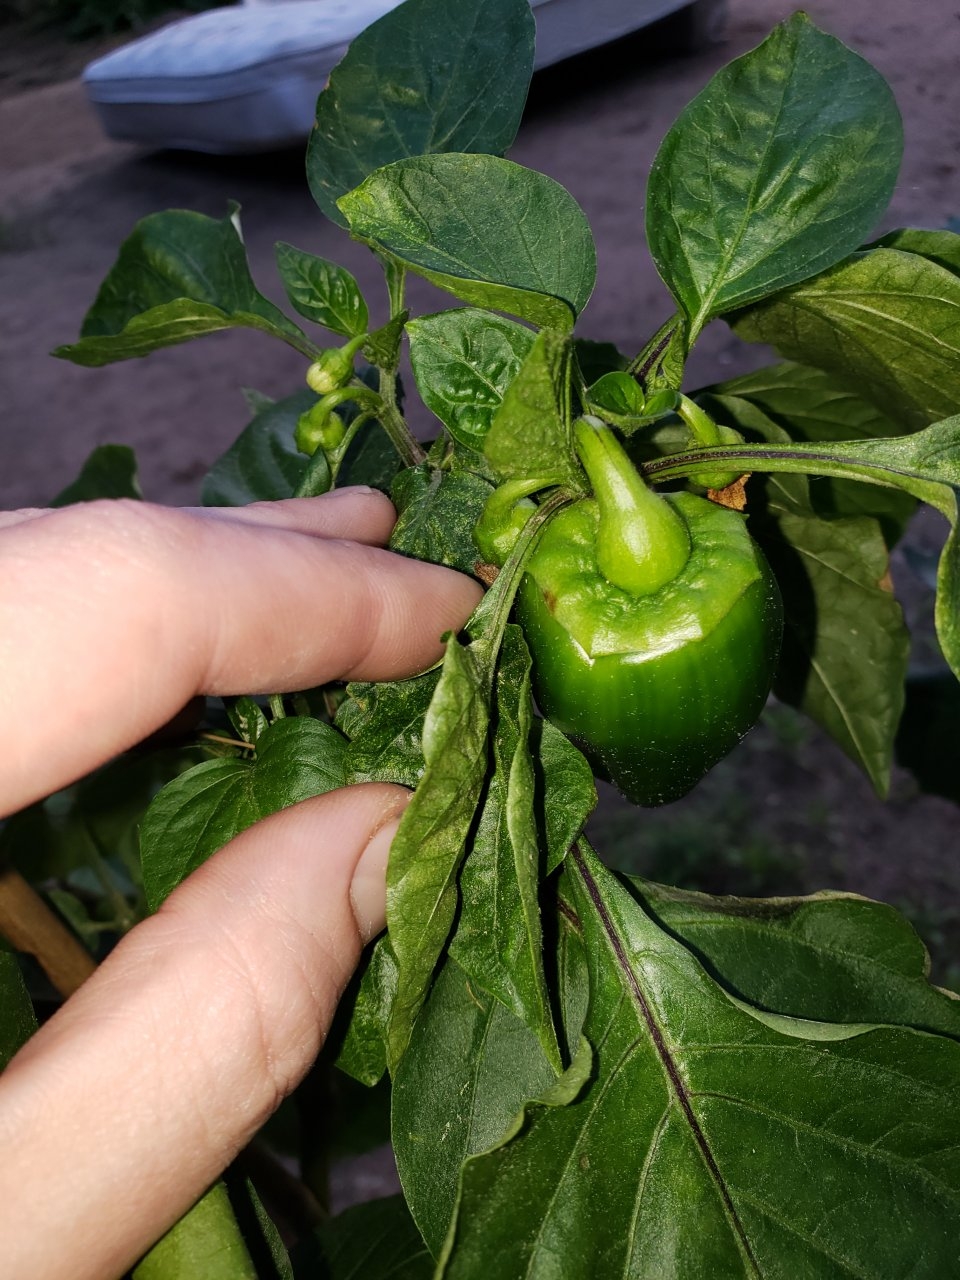 New baby peppers popping up